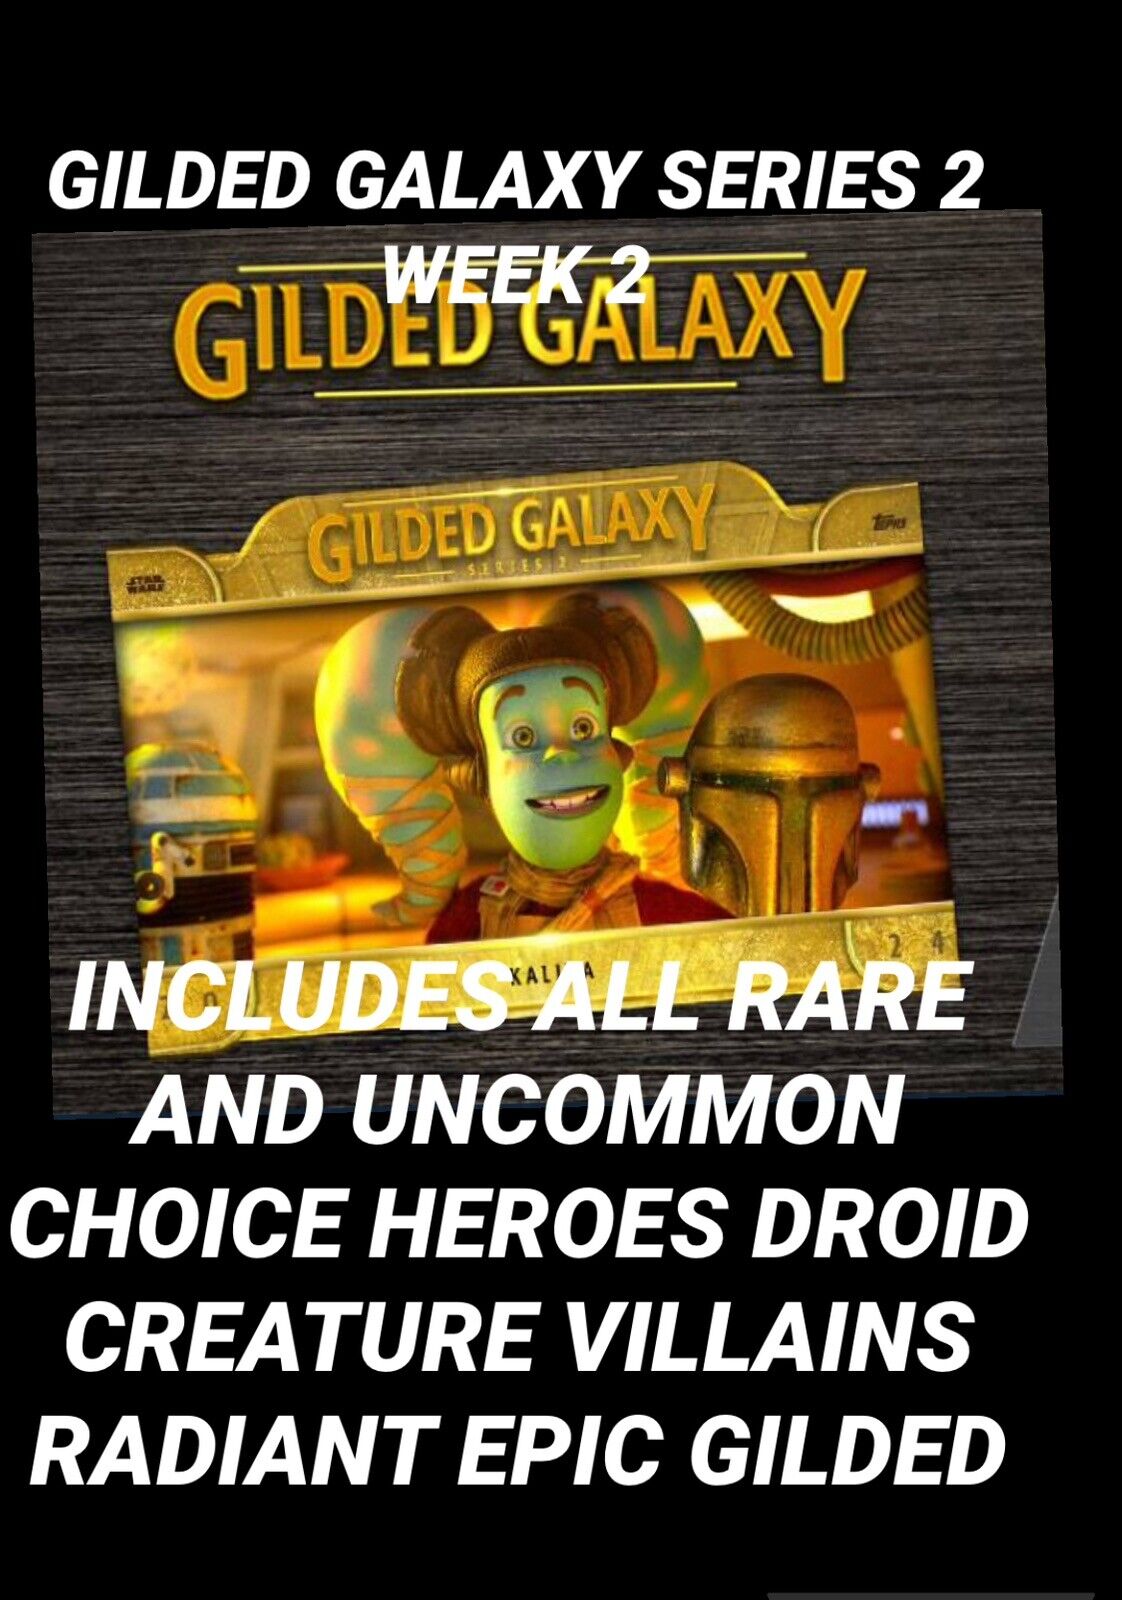 topps star wars card Trader GILDED GALAXY WEEK 2 All UC RARE And EPIC GILDED